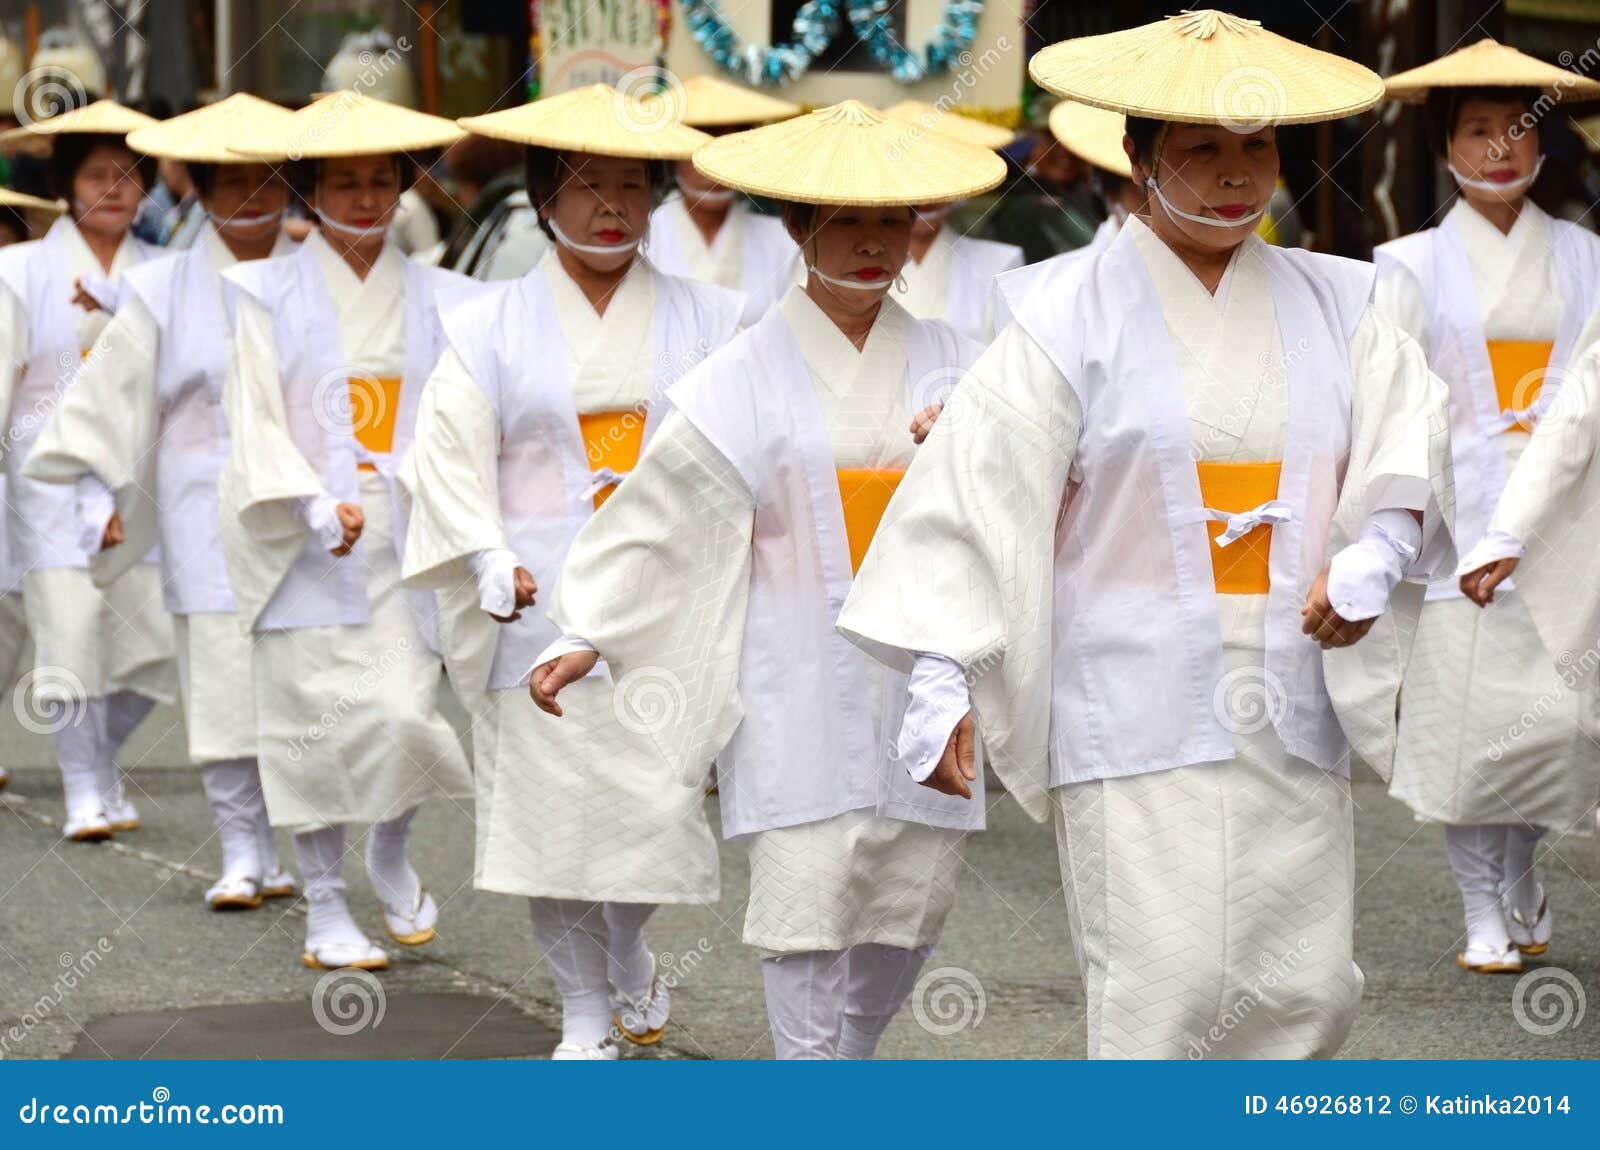 Mount Koya, Japan - June 14, 2011: Elderly Japanese dancers in white traditional clothes during Aoba festival, an annual event celebrating the birthday of Kobo Daishi (Kukai), one of Japan s most renowned Buddhist saints.